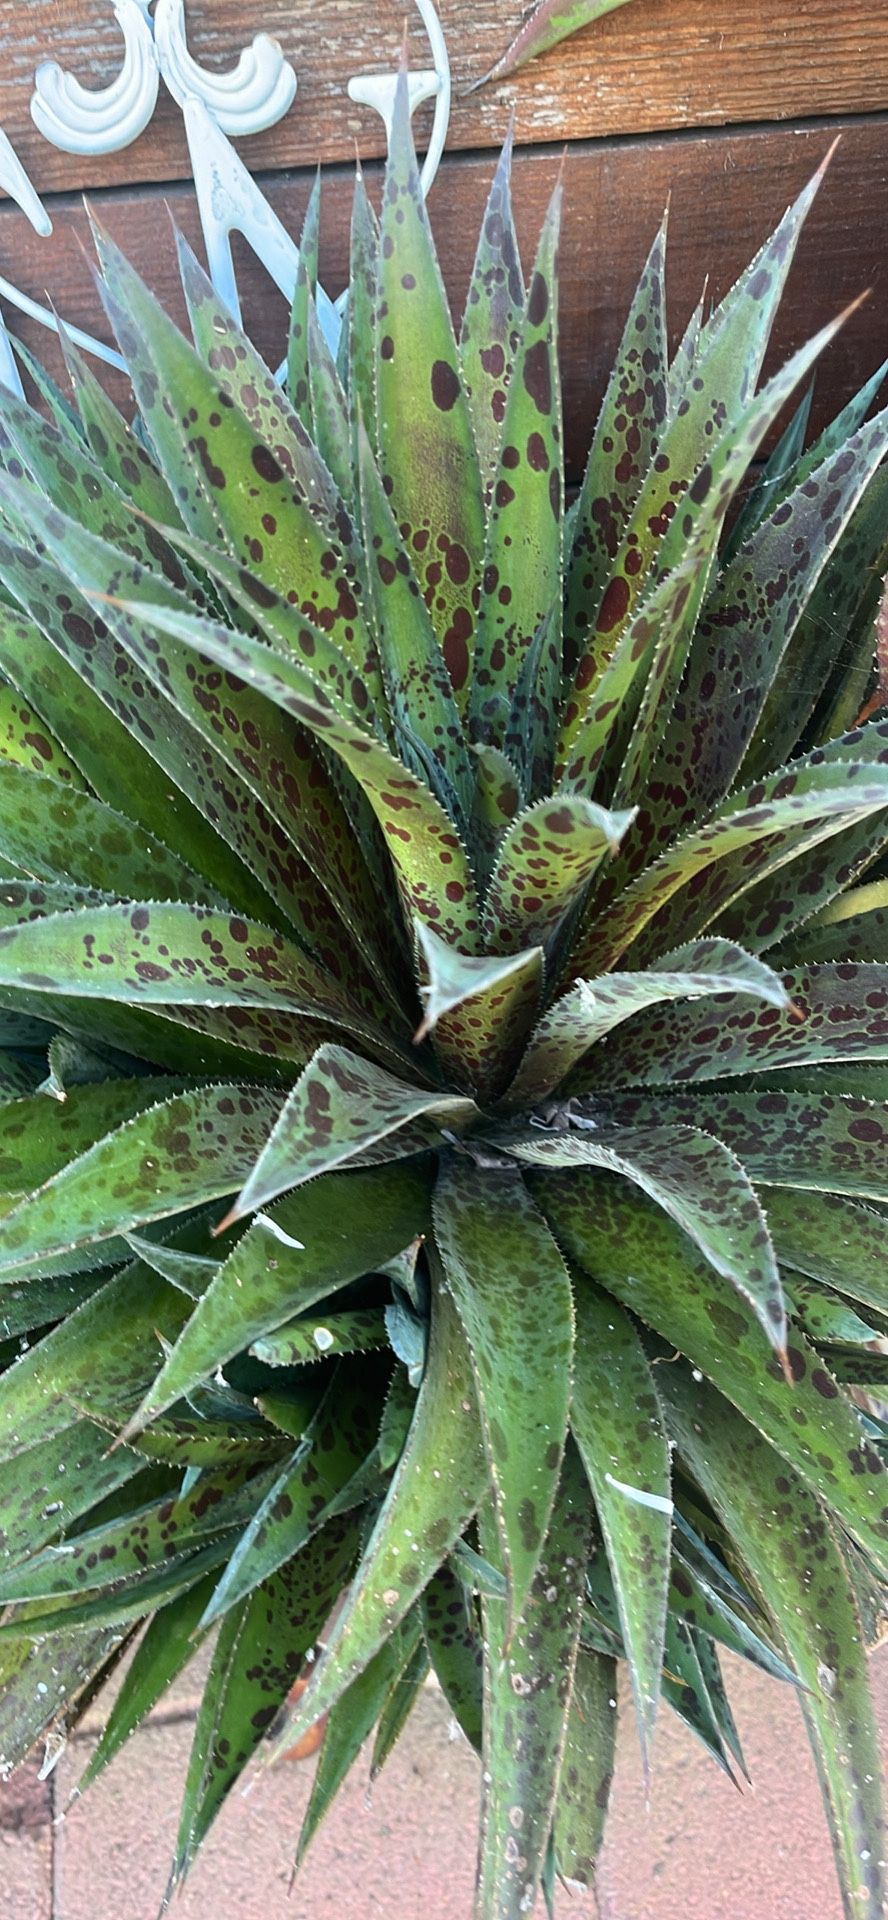 Pineapple agave